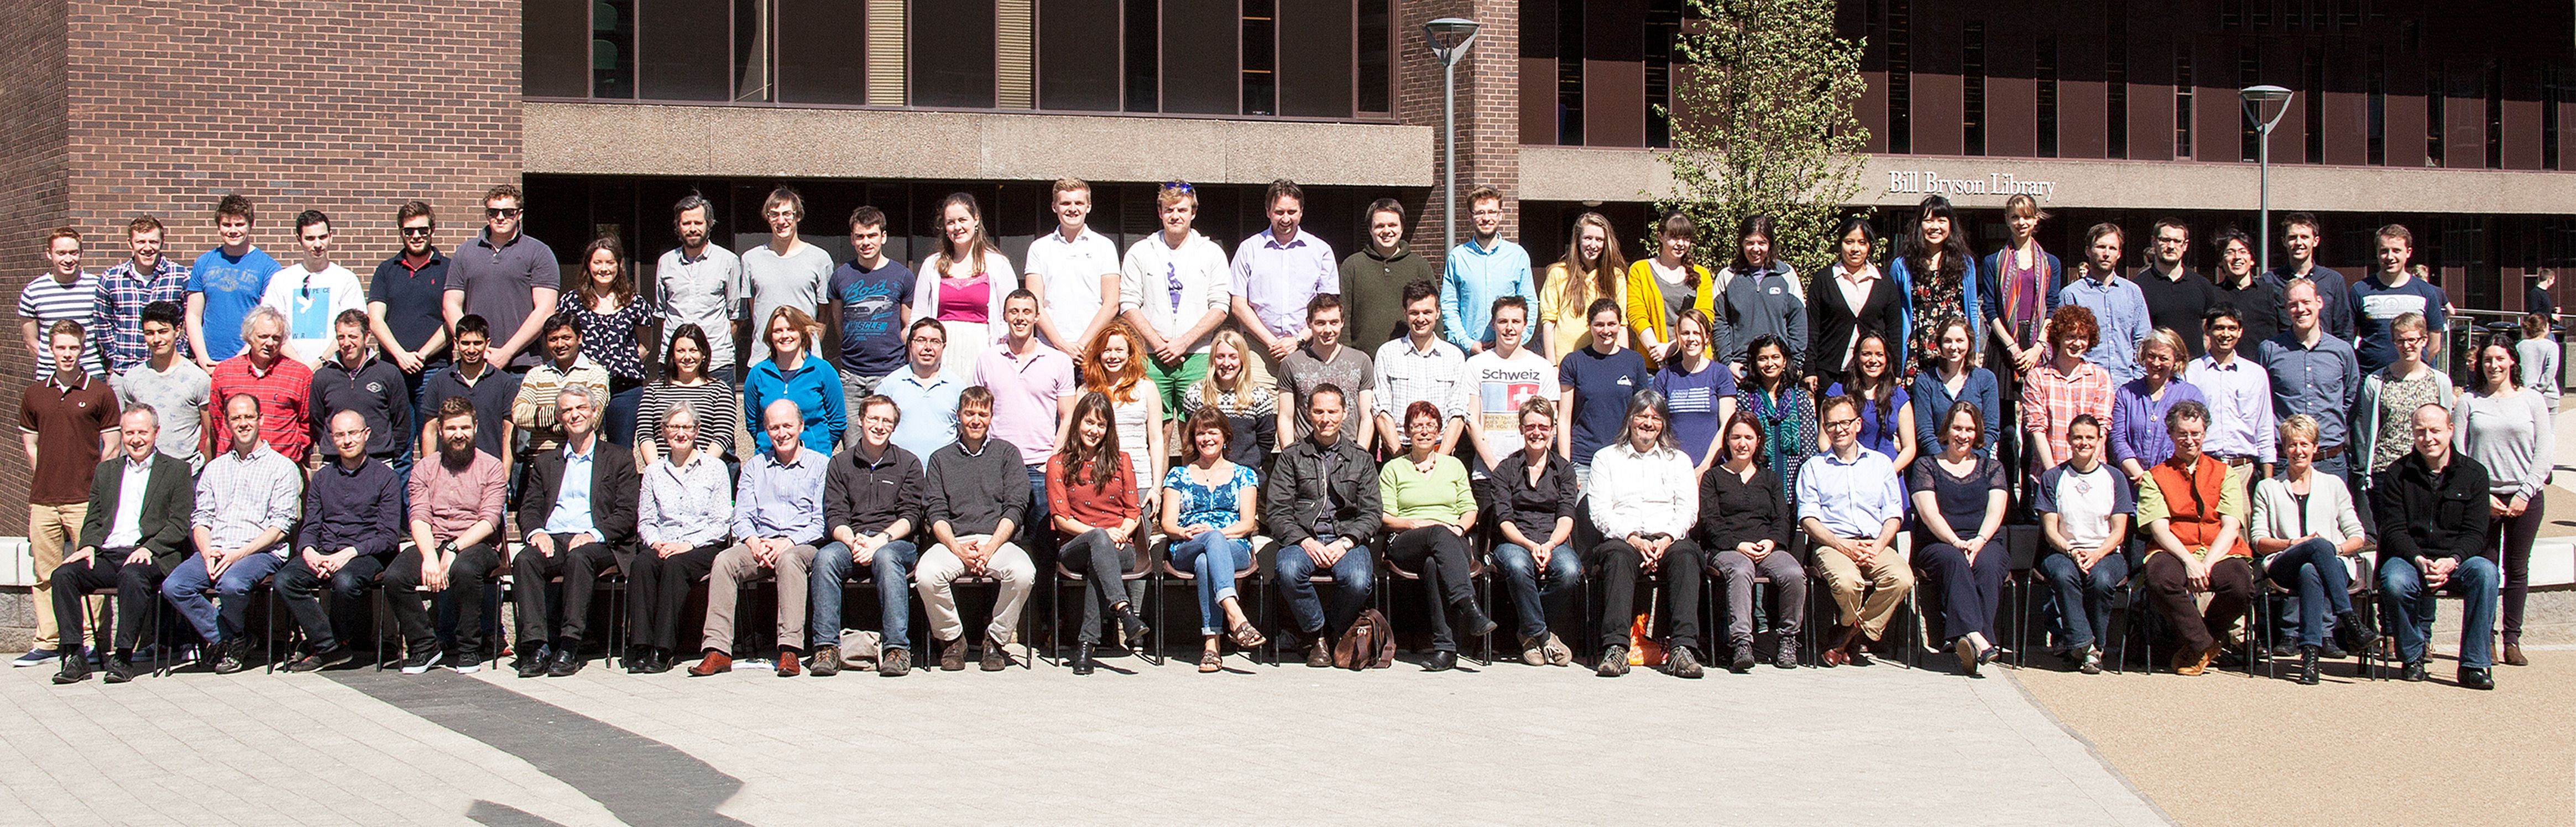 Geography Department Postgraduate Group Photo from 2014